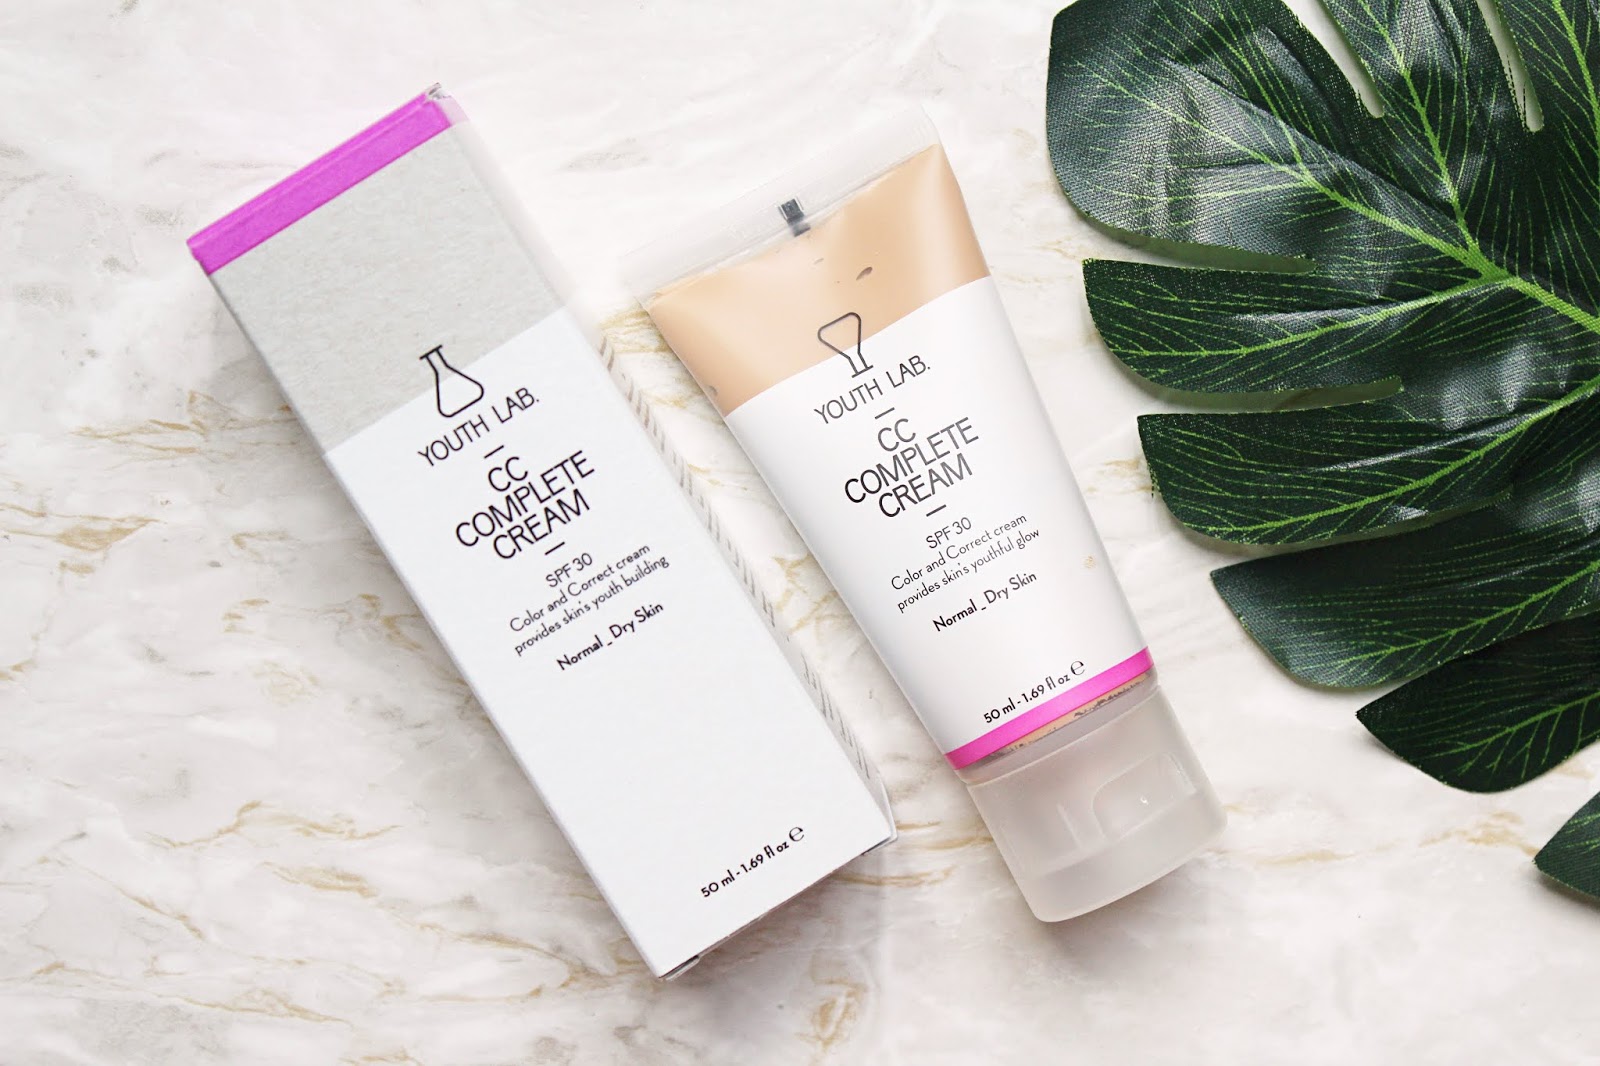 Youth Lab CC Complete Cream SPF 30 Review